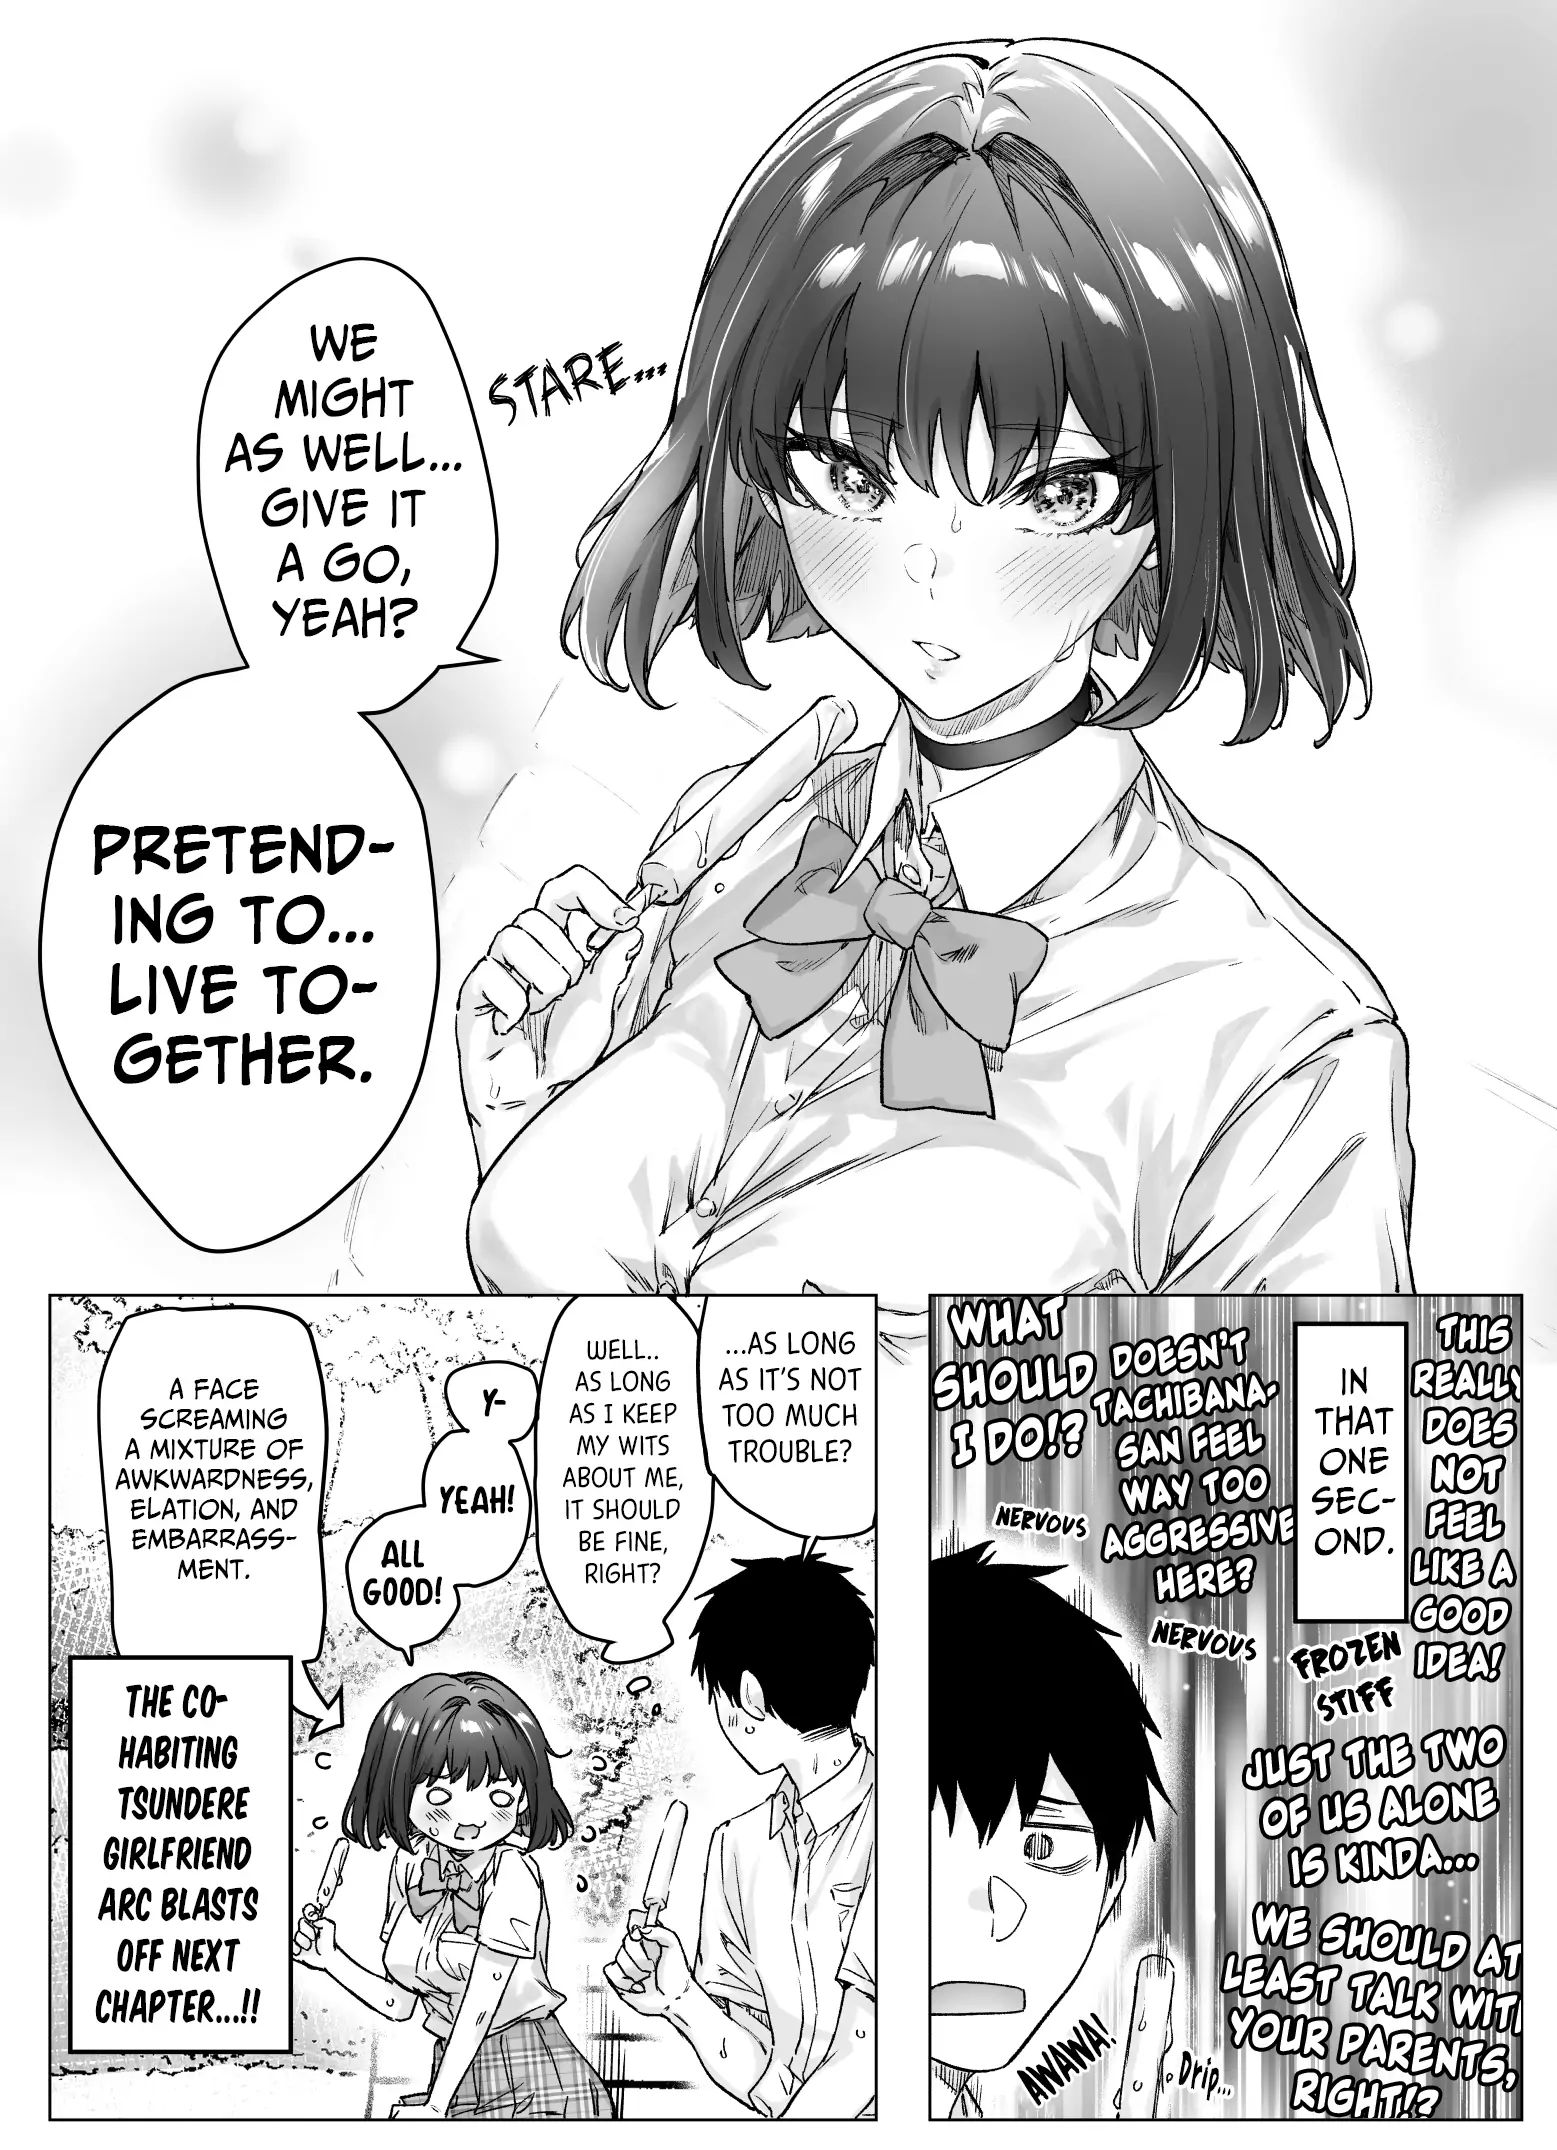 The Tsuntsuntsuntsuntsuntsun Tsuntsuntsuntsuntsundere Girl Getting Less And Less Tsun Day By Day Chapter 70